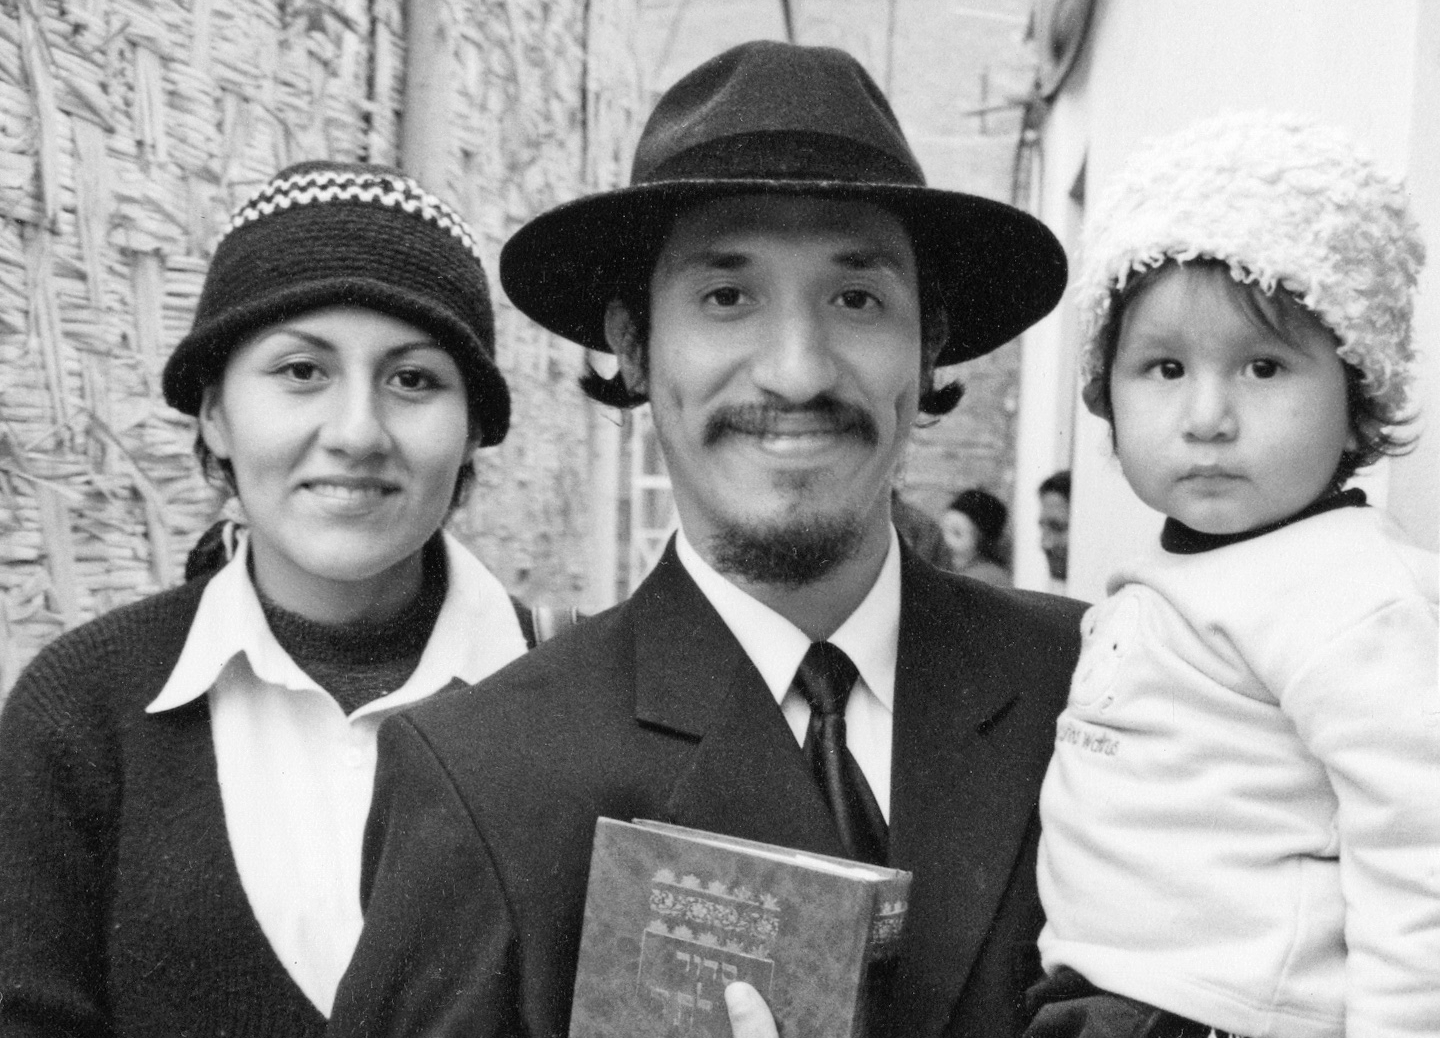 Peruvian hassidic Jew moves to Israel, gains large  following - The  Jerusalem Post